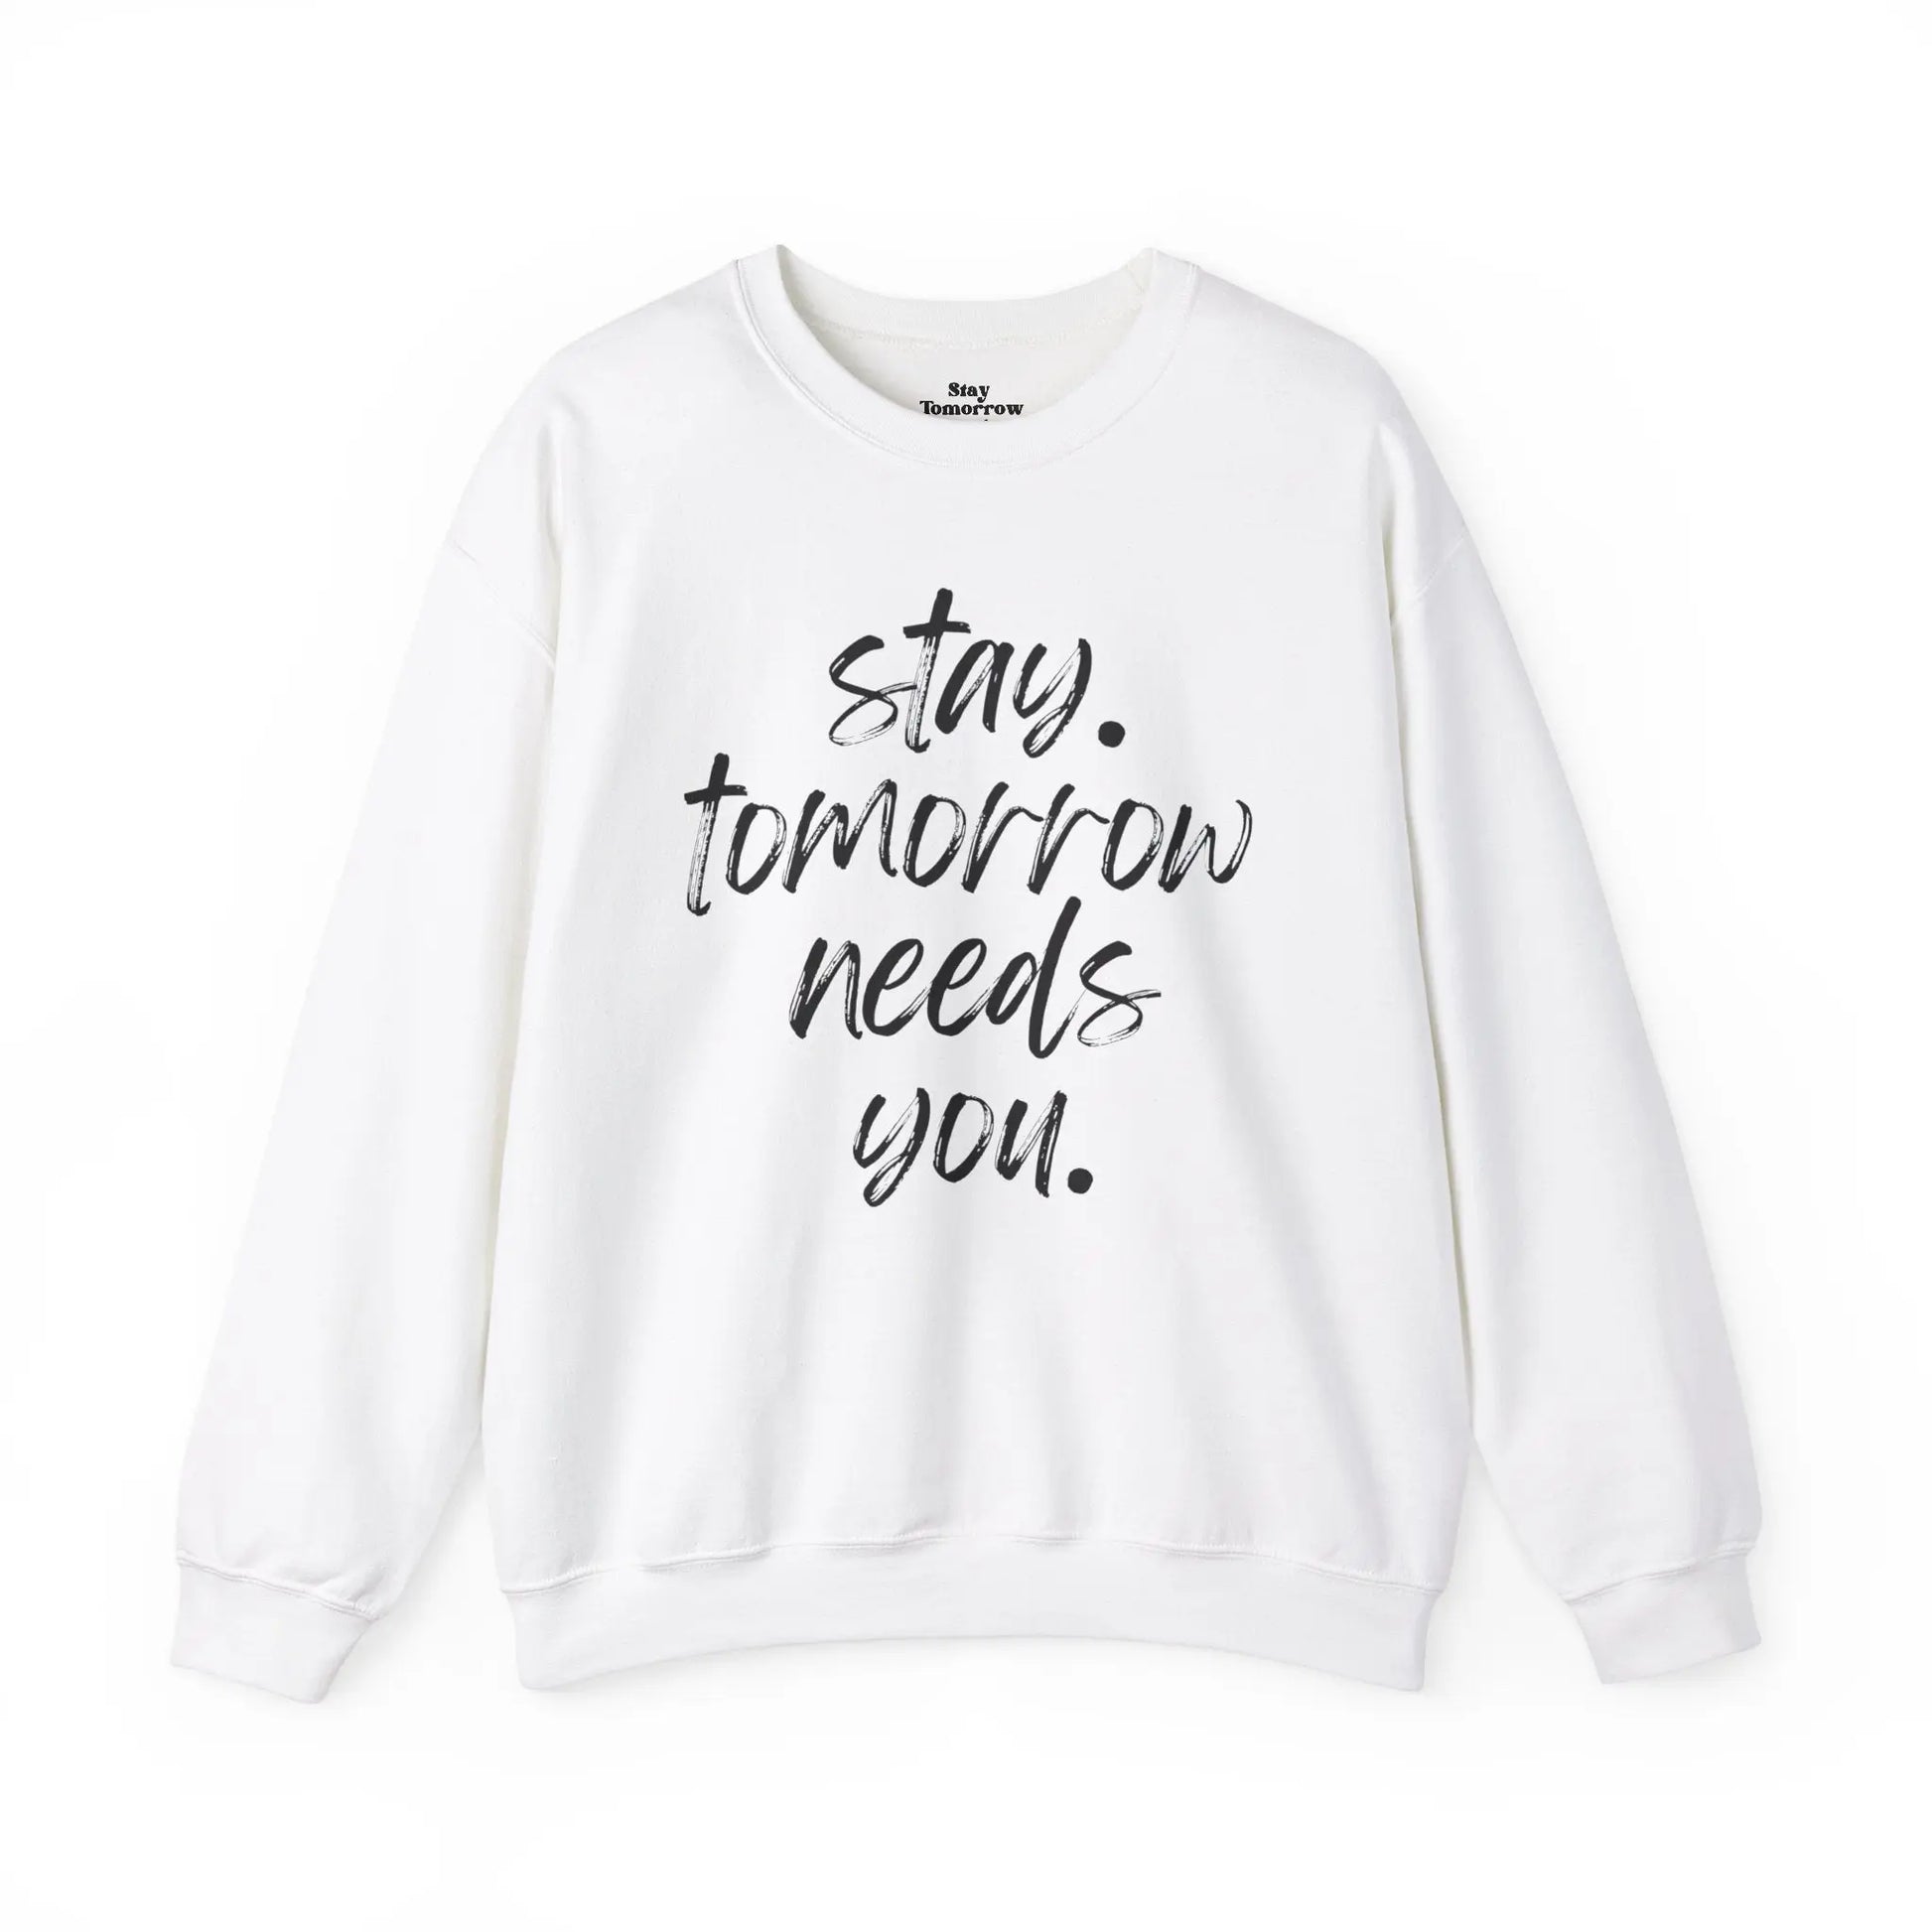 Stay Tomorrow Needs You Sweatshirt Mental Health Awareness Suicide Prevention Mothers Day Fathers Day Gift Ideas Veteran Mental Health Printify